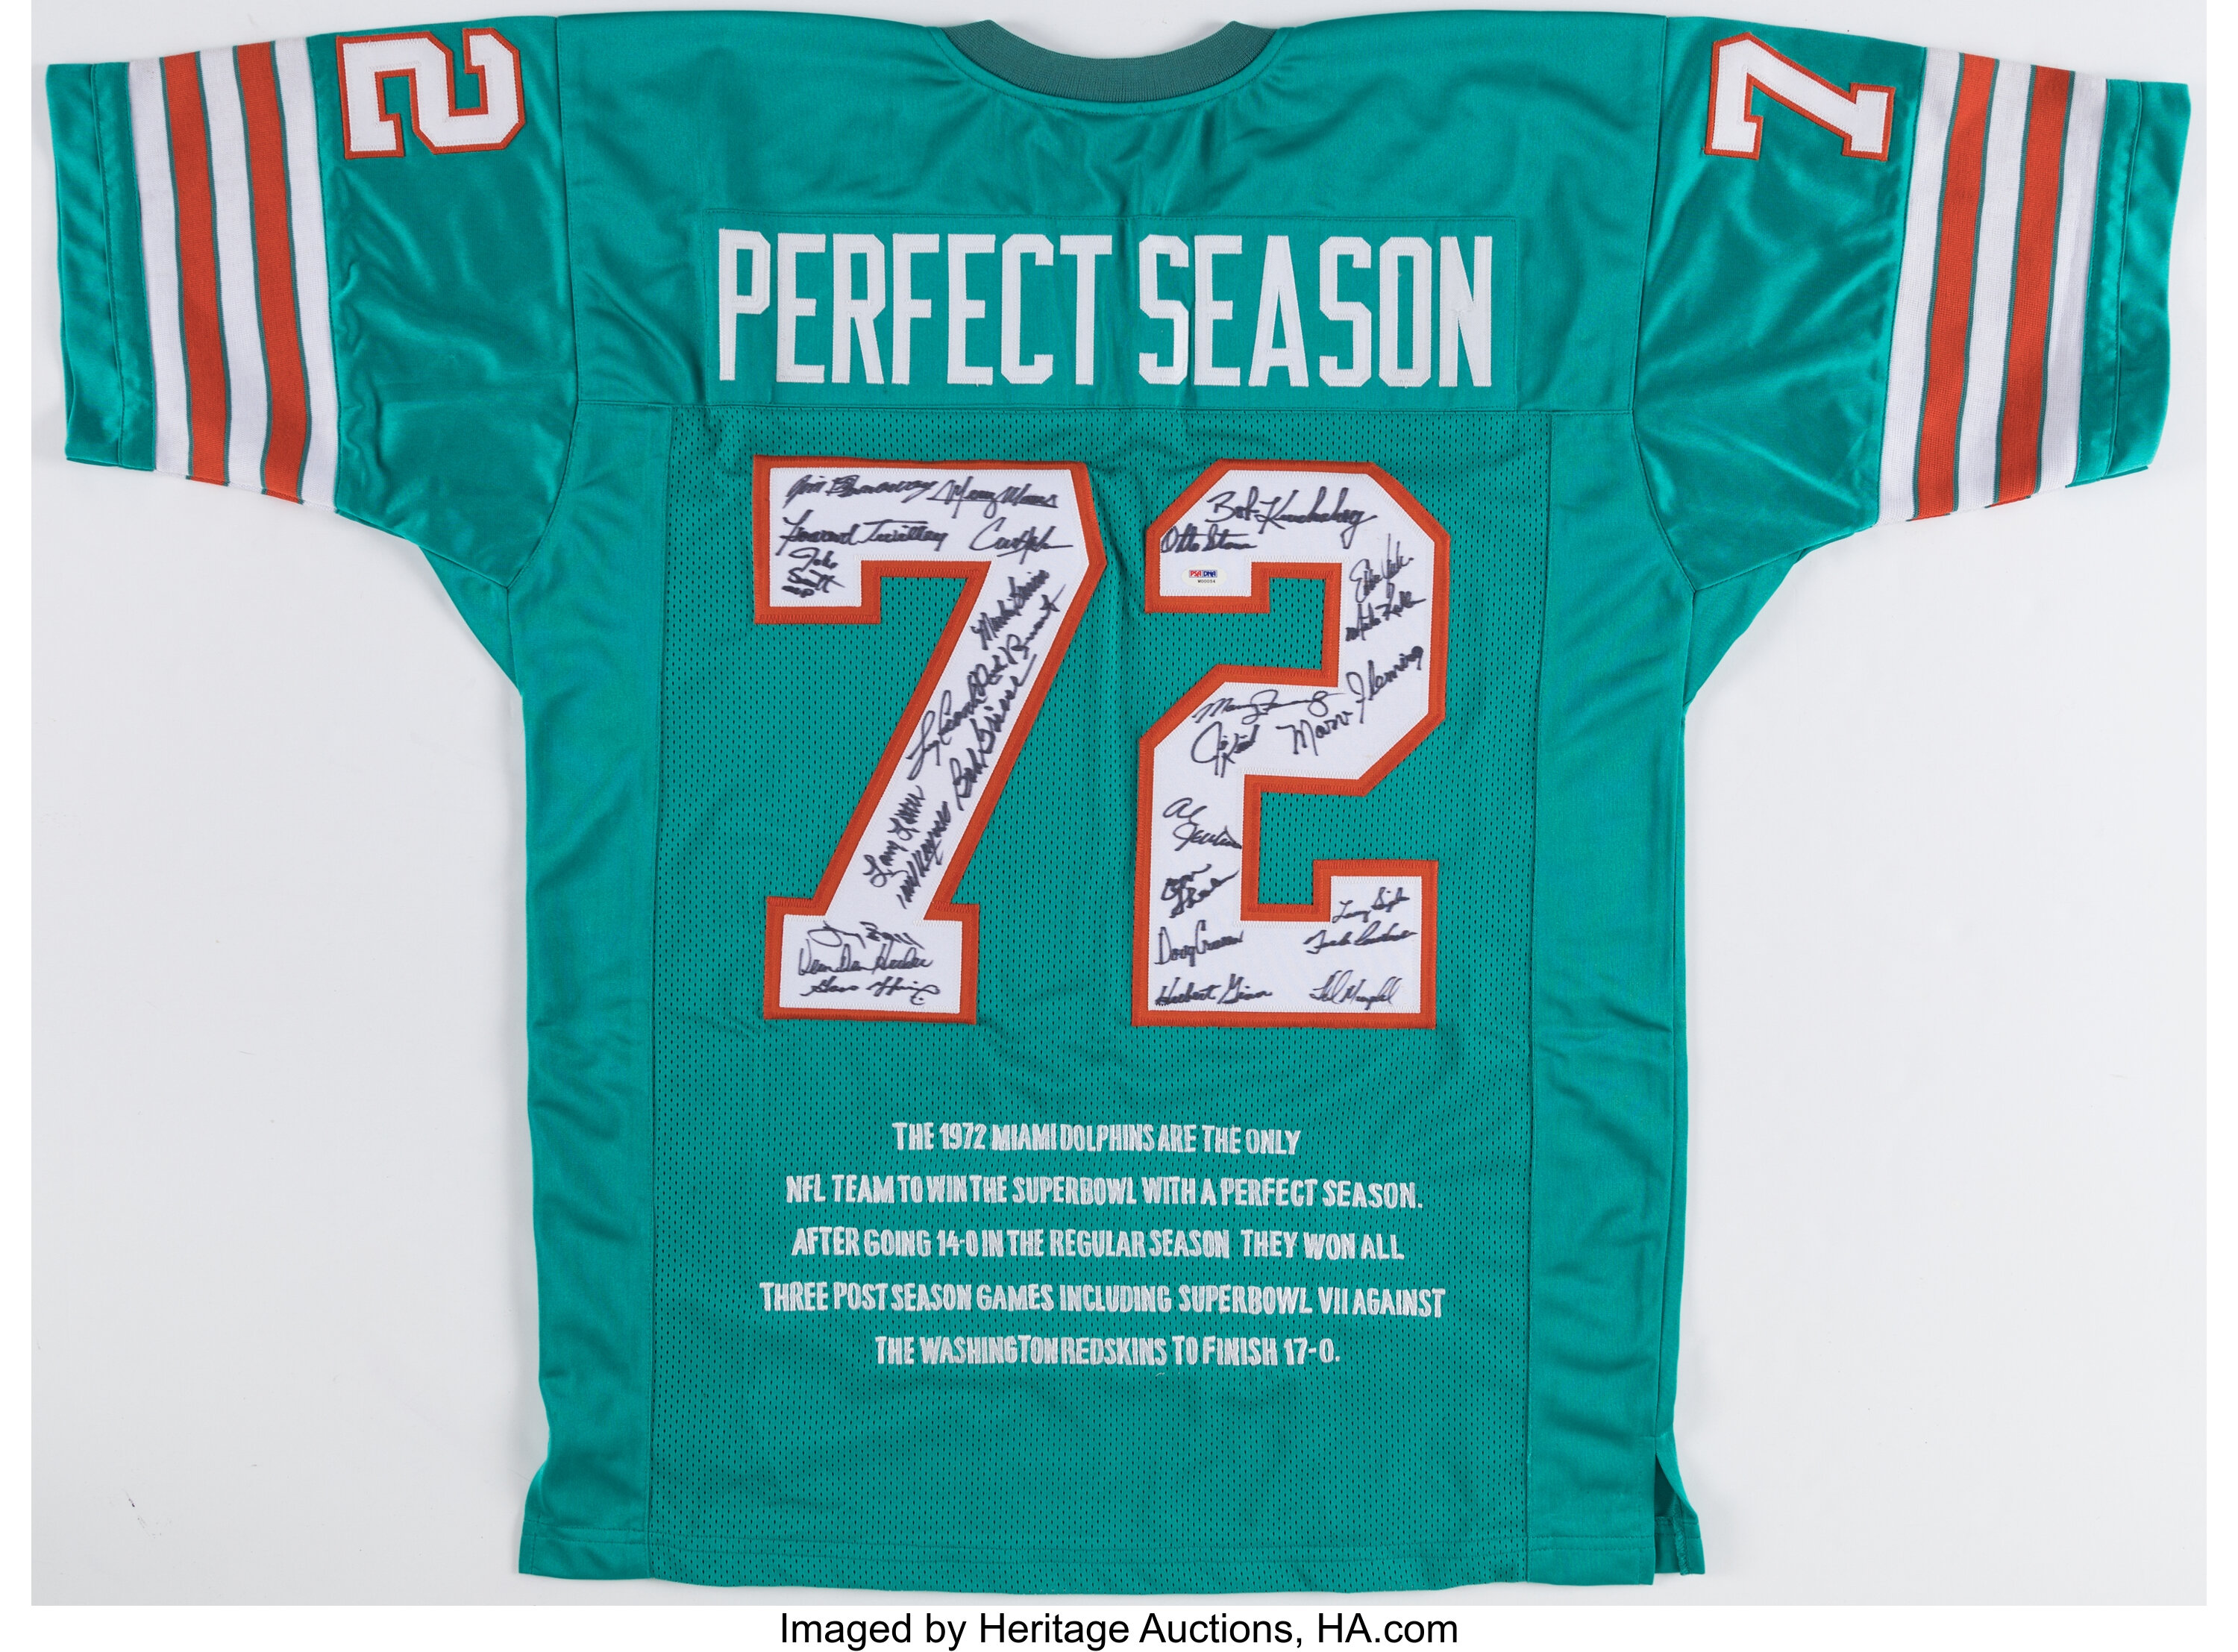 Undefeated: Inside the Miami Dolphins' Perfect Season [Book]